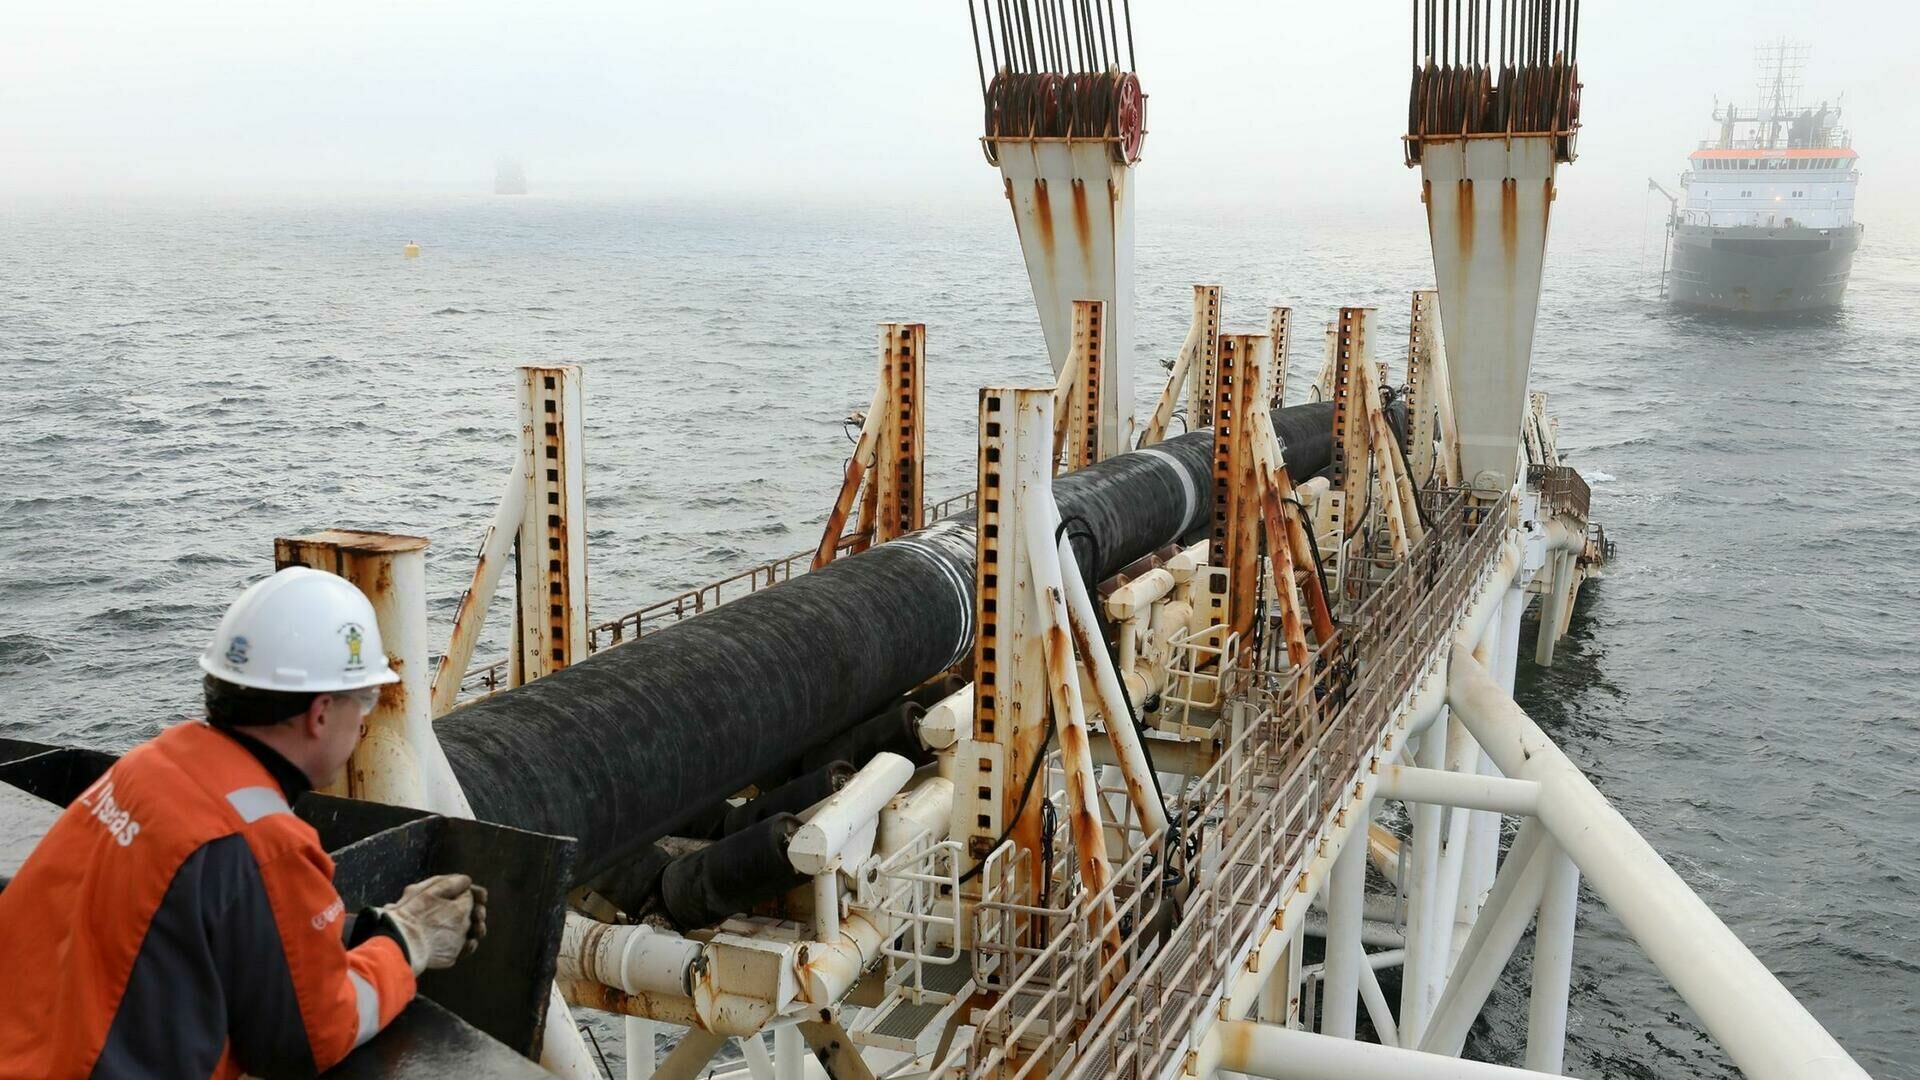 A vessel was headed to Germany to complete the construction of the Nord Stream 2 pipeline